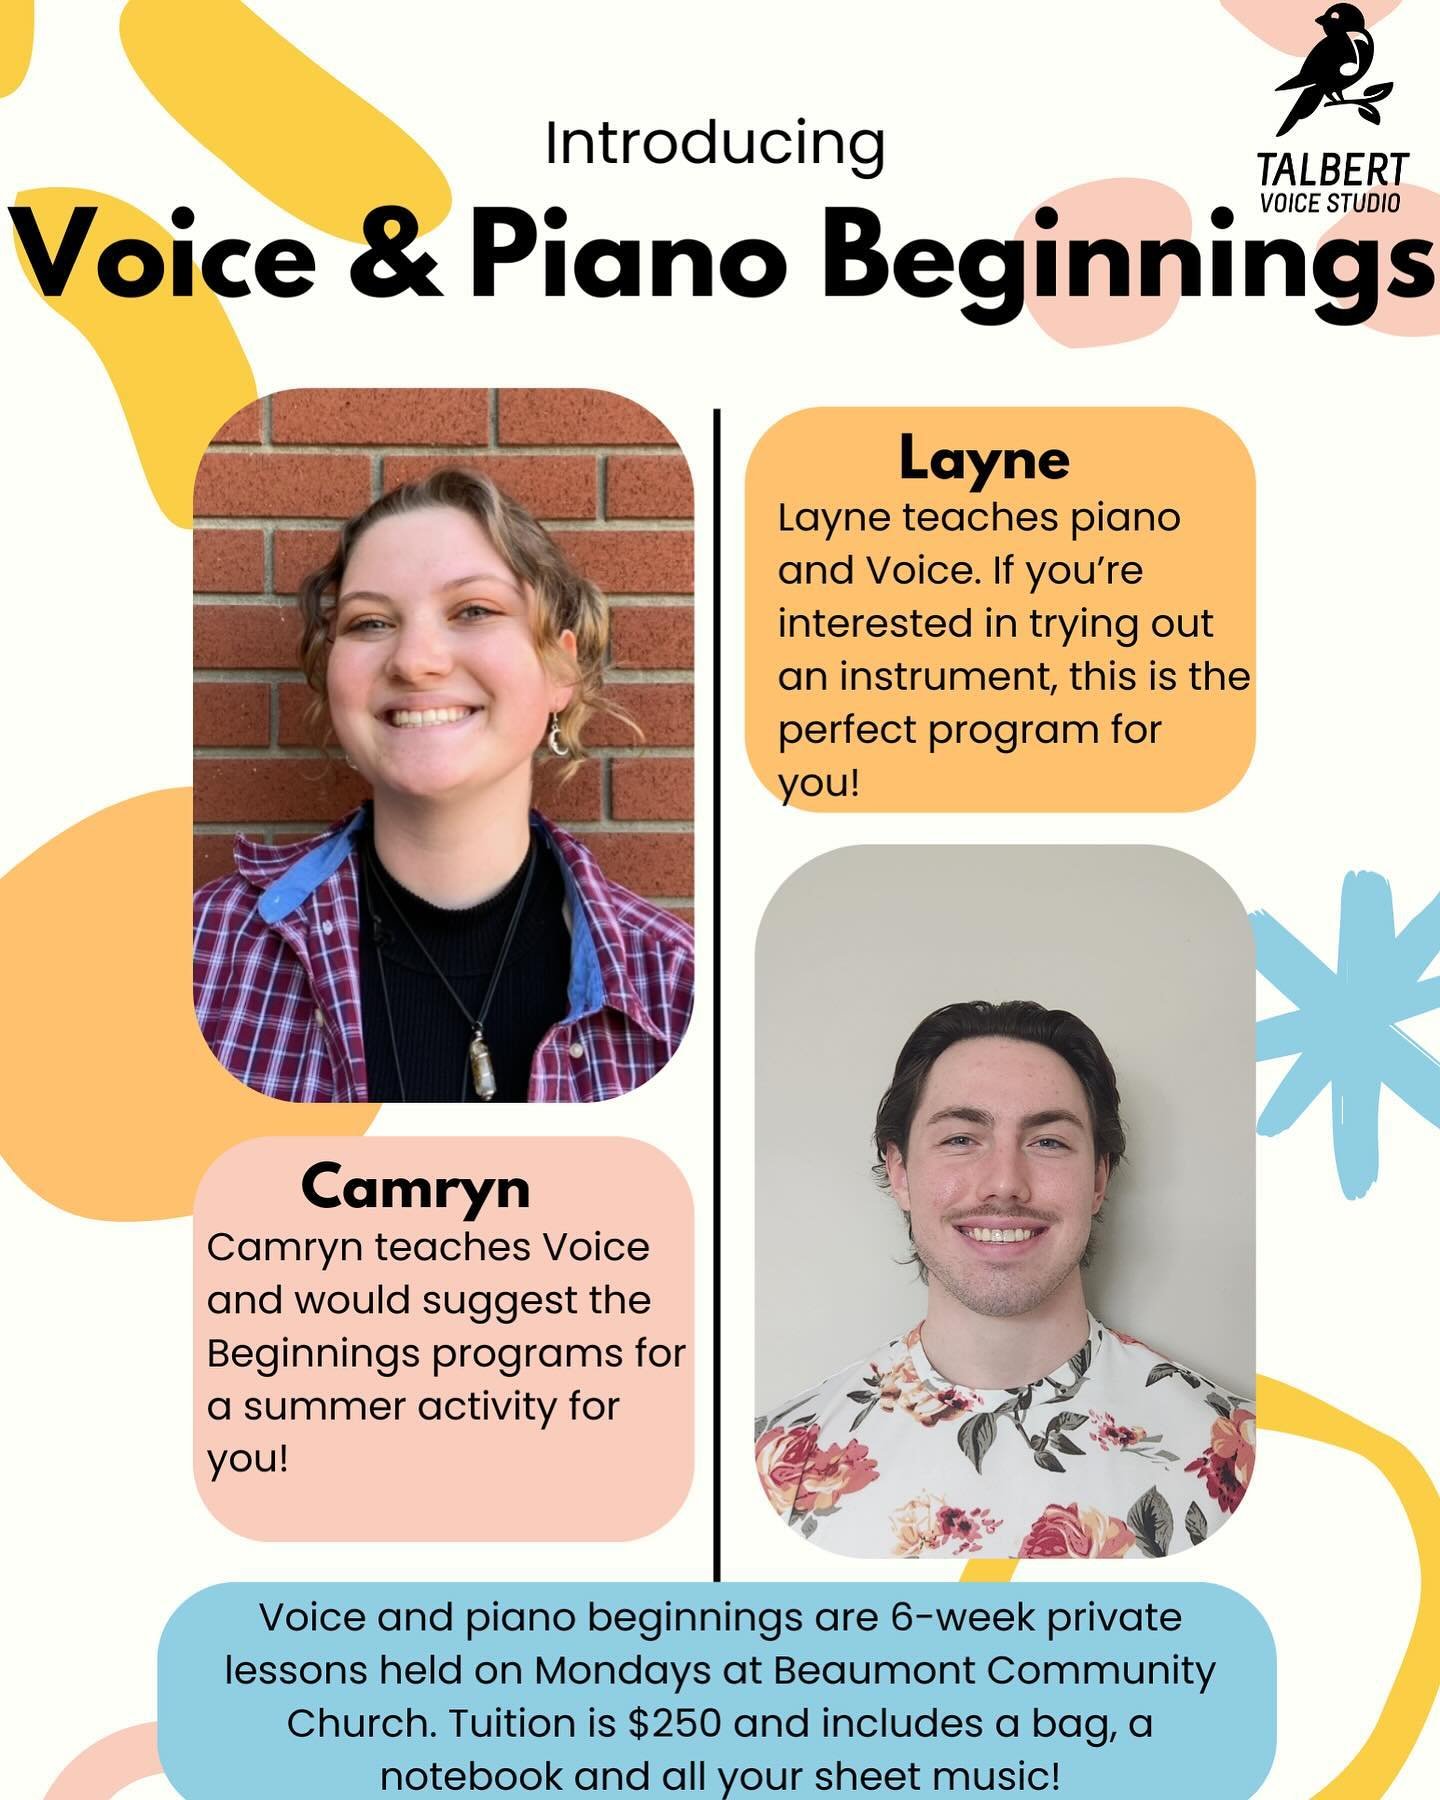 Do you or your child want to try out voice or piano lessons? Try out our 6-week Voice and/or Piano Beginning classes!

We are offering a session over this summer that is flexible to work with your holidays! 

Sign up on our website under registration